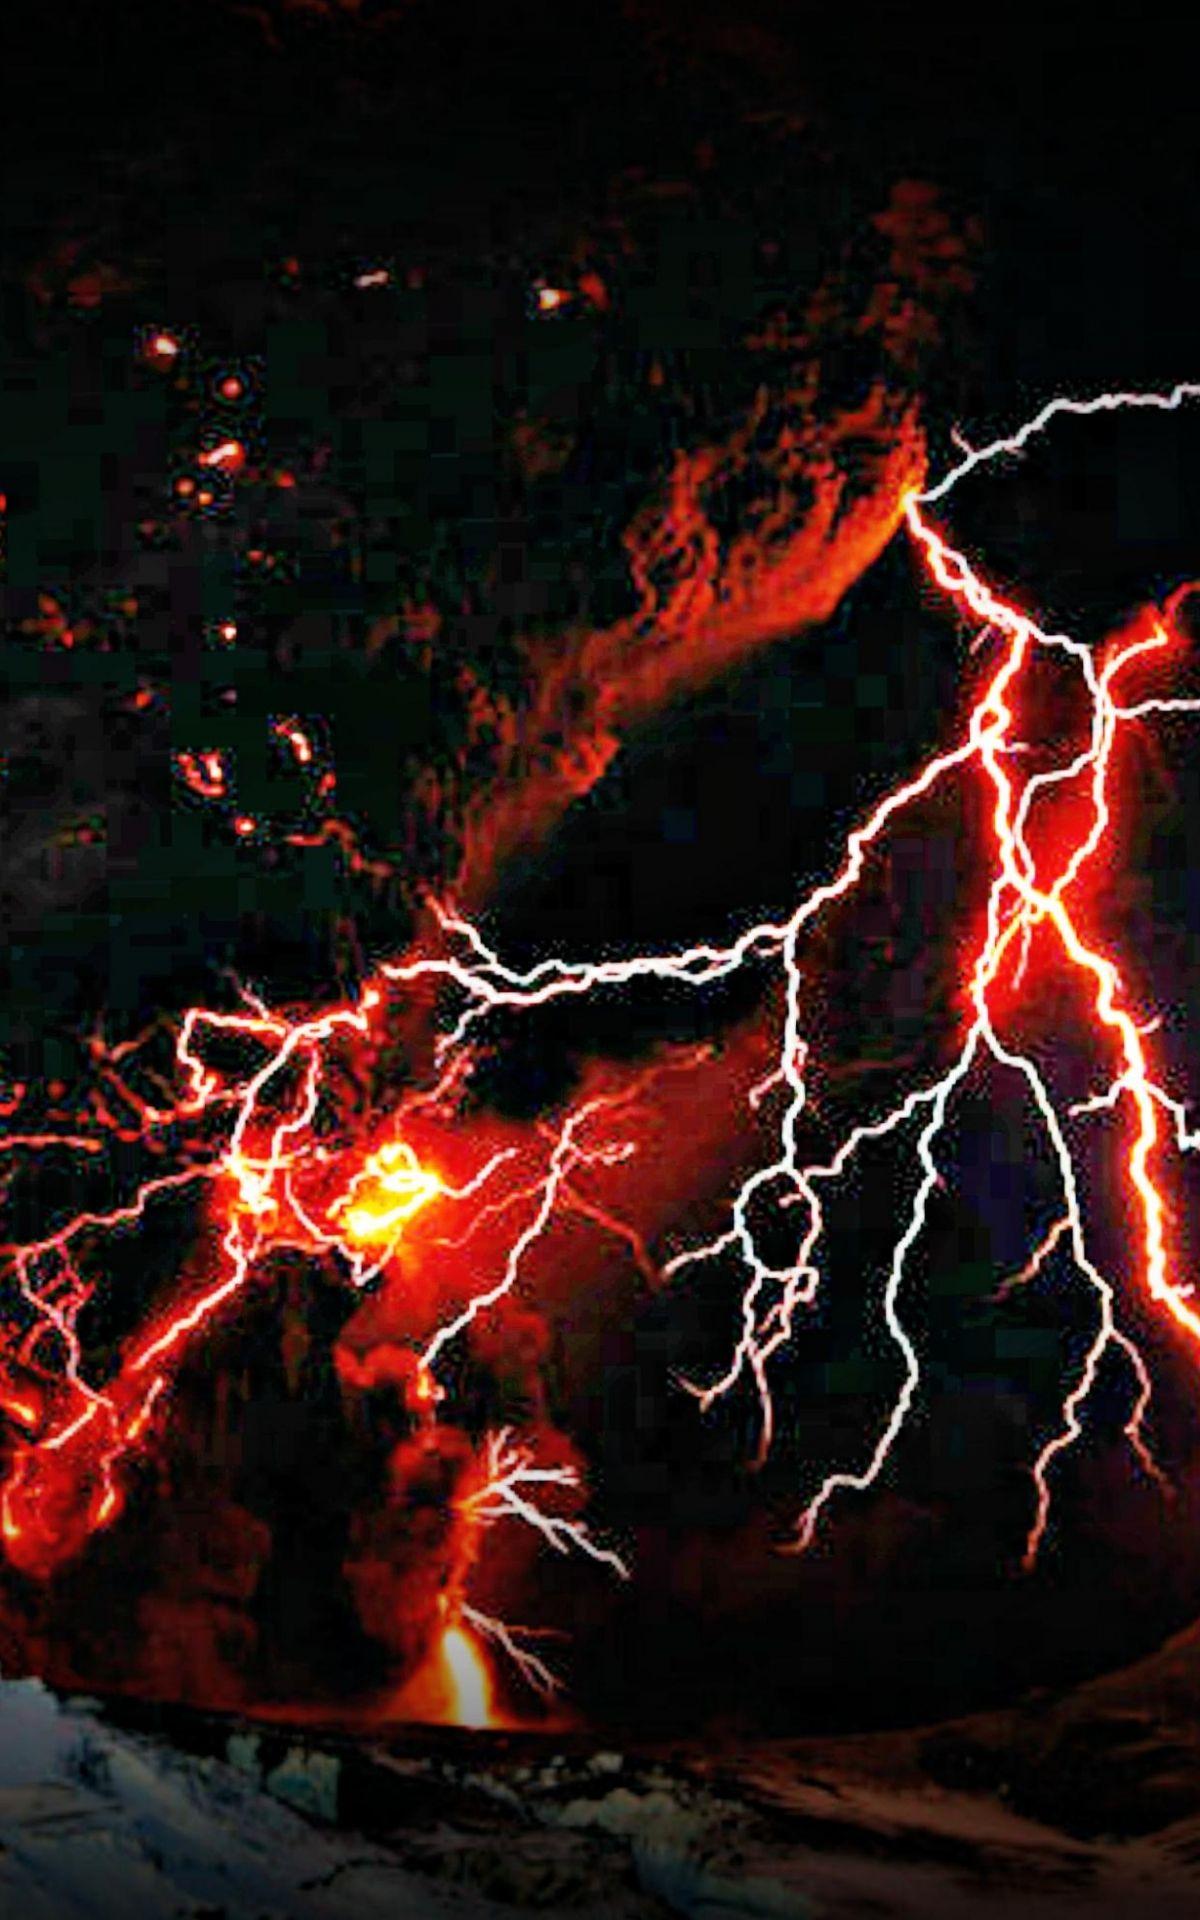 Red Lightning Wallpapers - Top Free Red Lightning Backgrounds